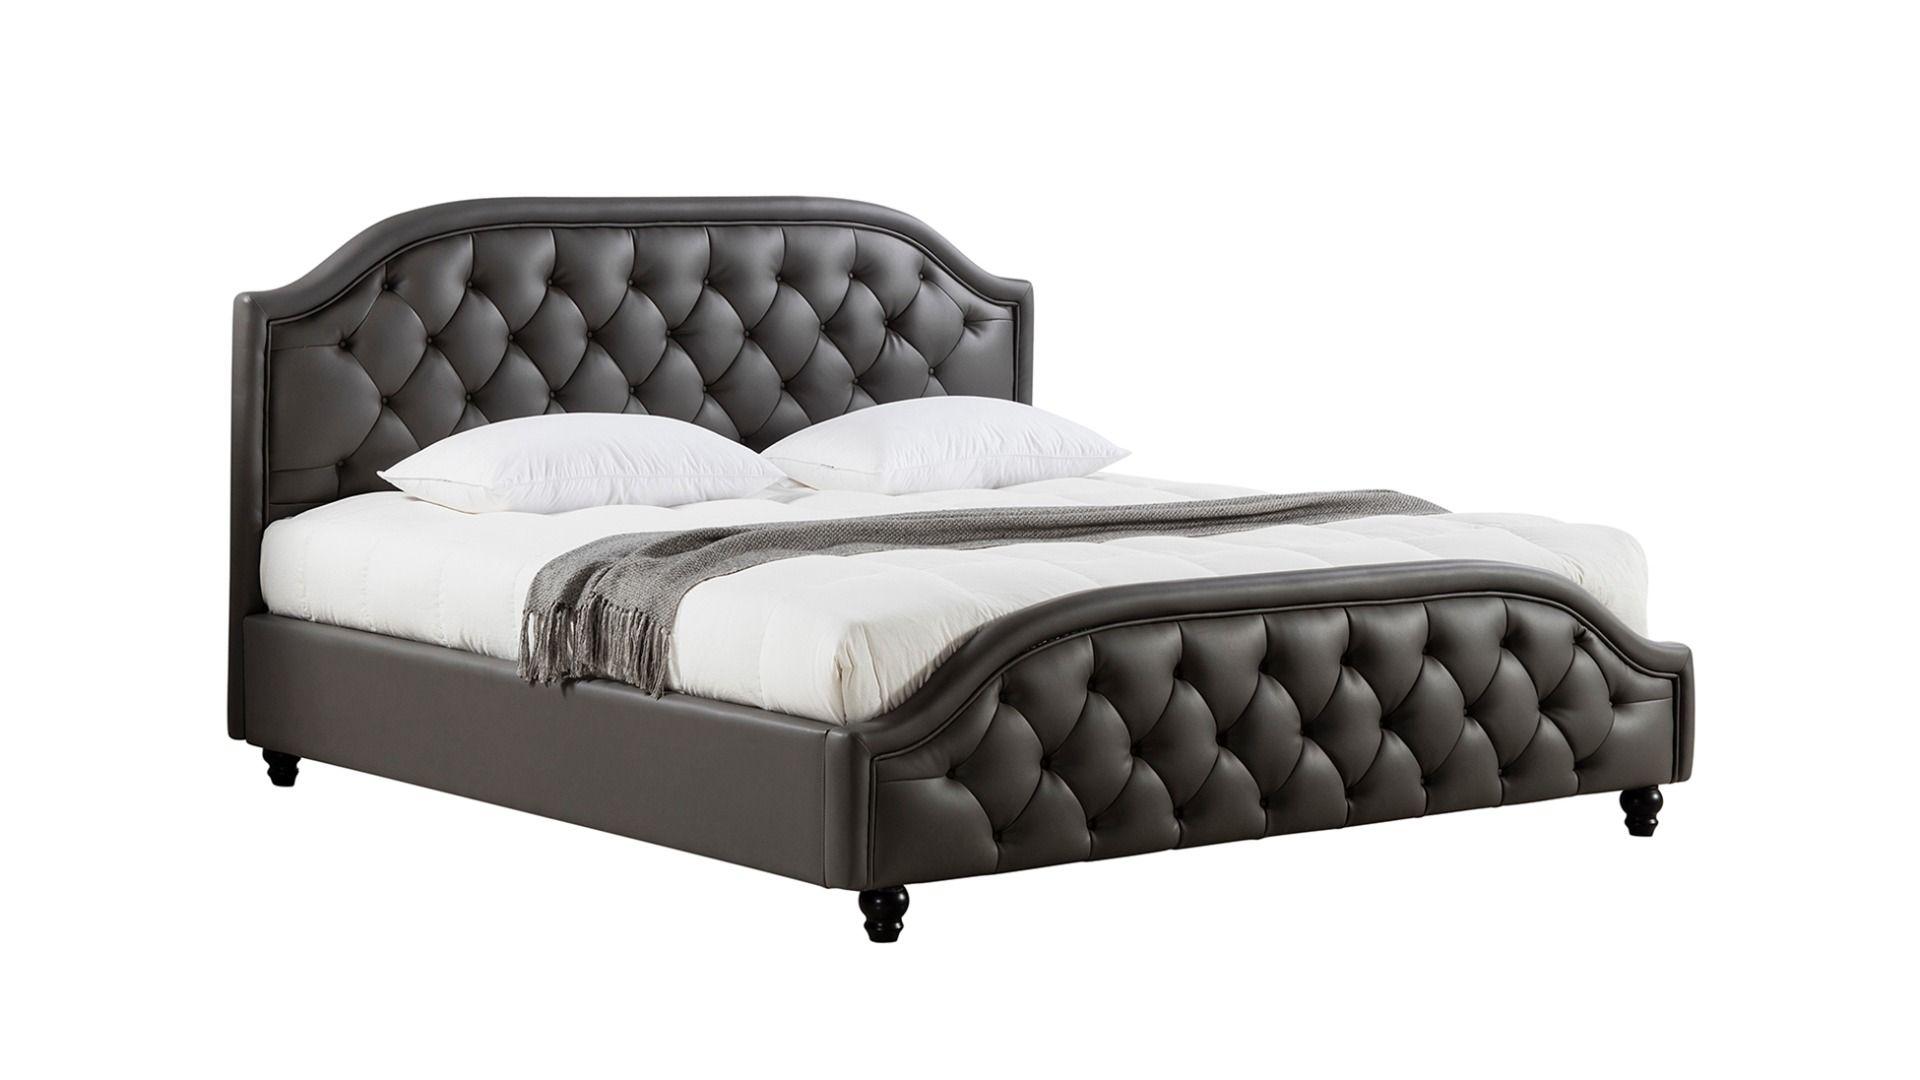 

    
Dark Gray Cal King Size Bed Leather Fabric Tufted Headboard American Eagle BD058
